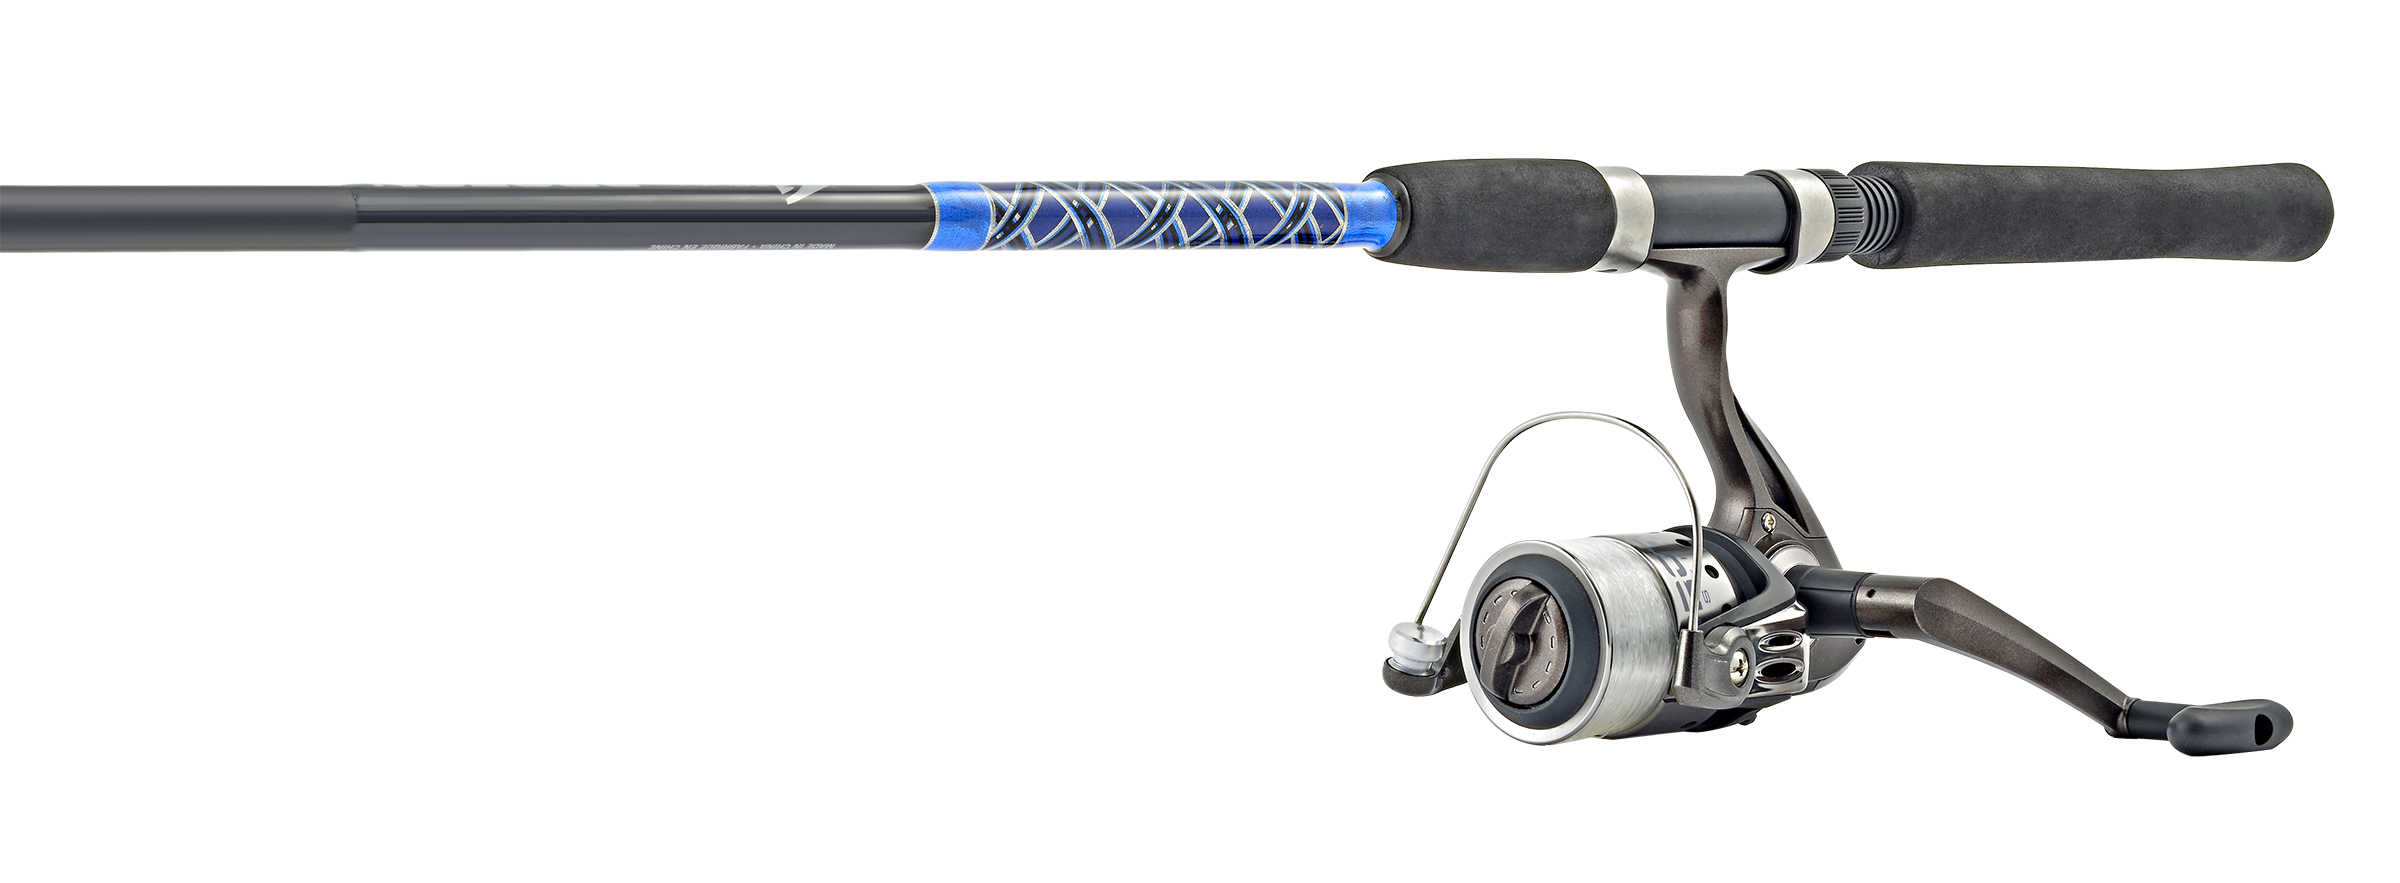 South Bend Proton Spinning Rod and Reel Combo - 6' SBP230/602MS — CampSaver